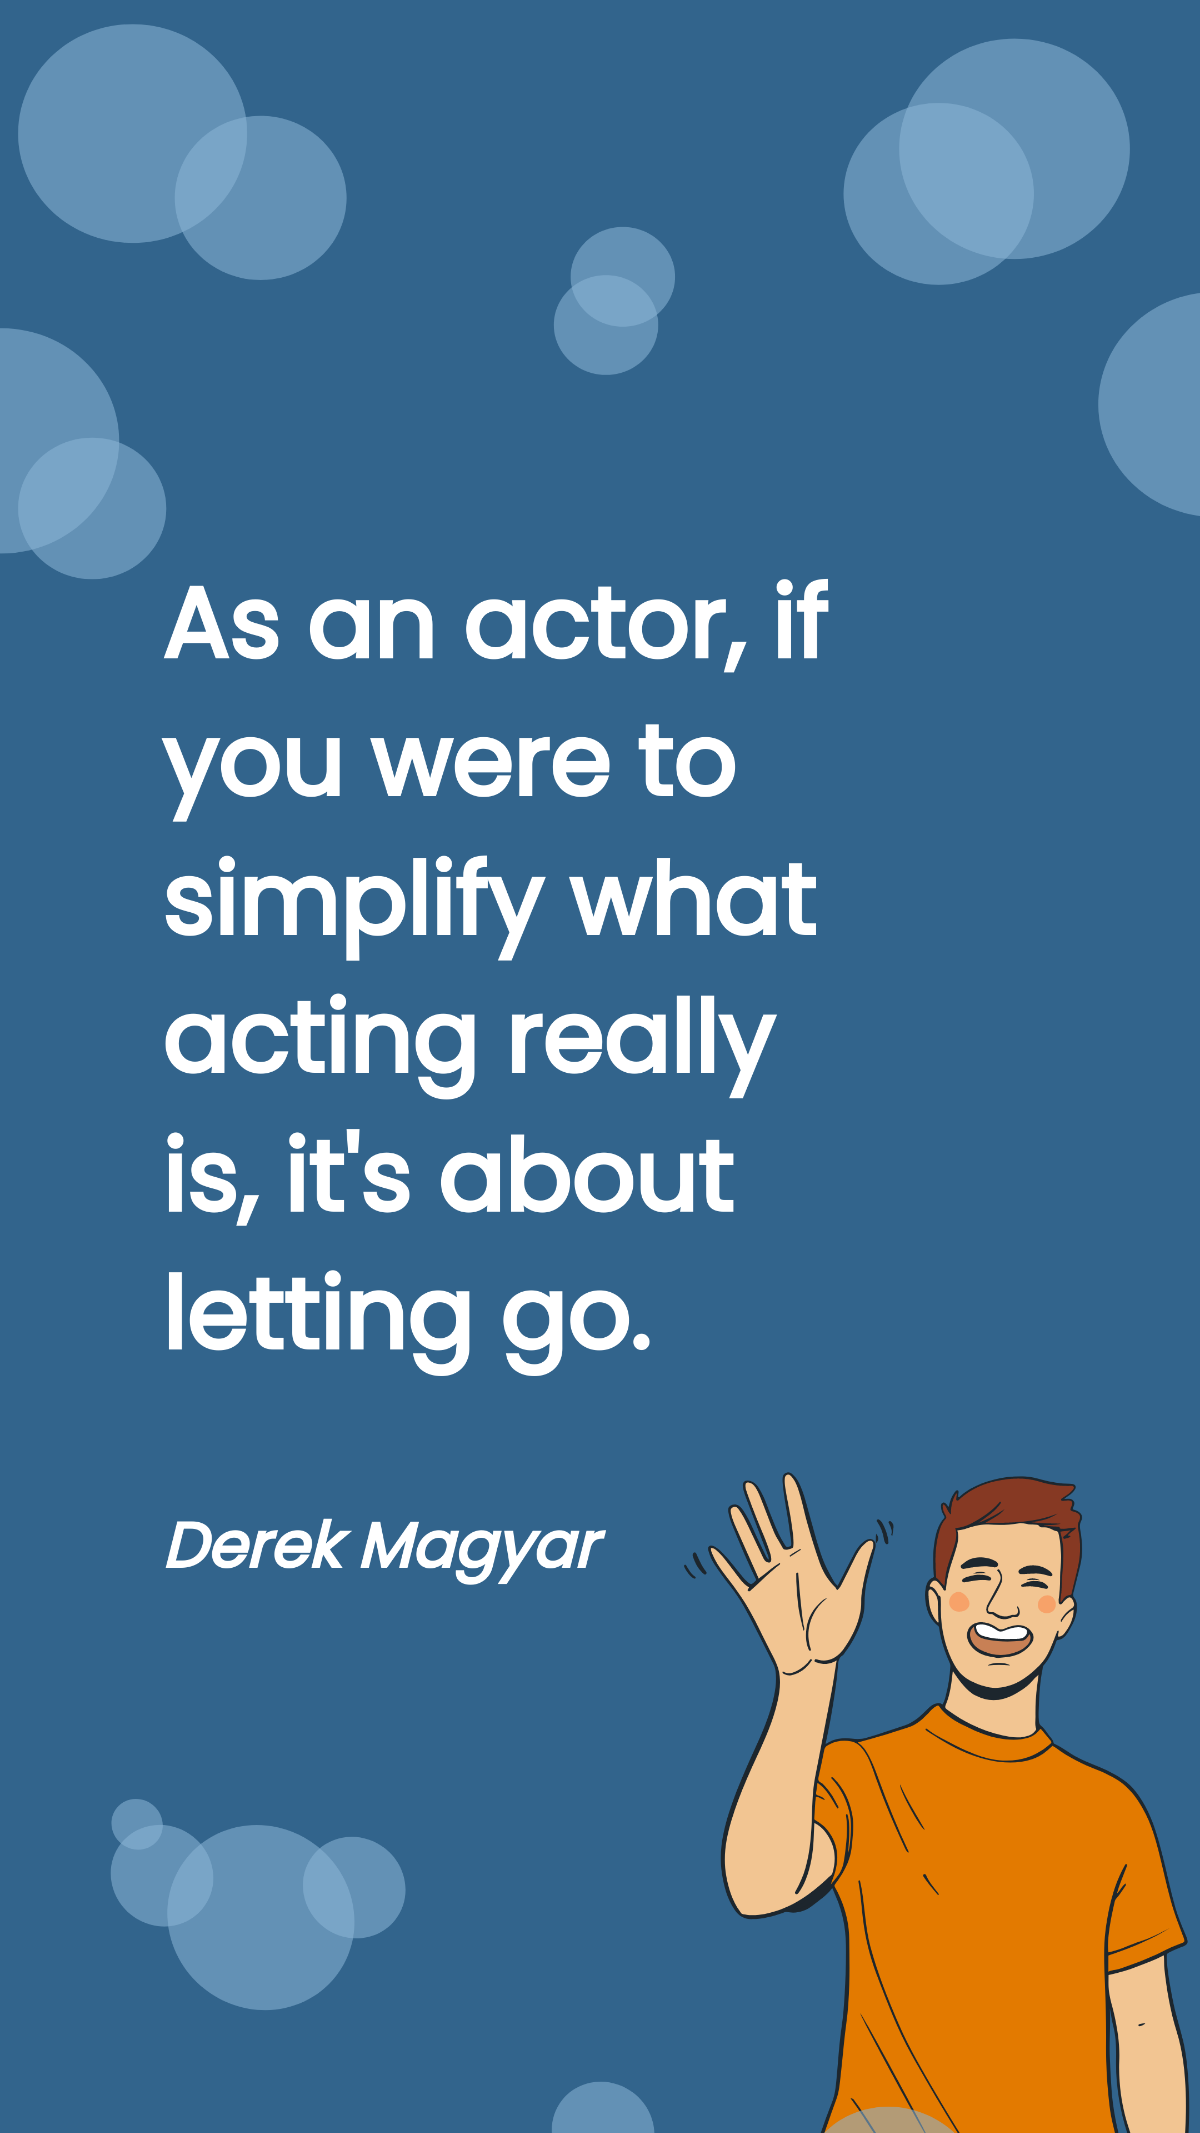 Derek Magyar - As an actor, if you were to simplify what acting really is, it's about letting go.